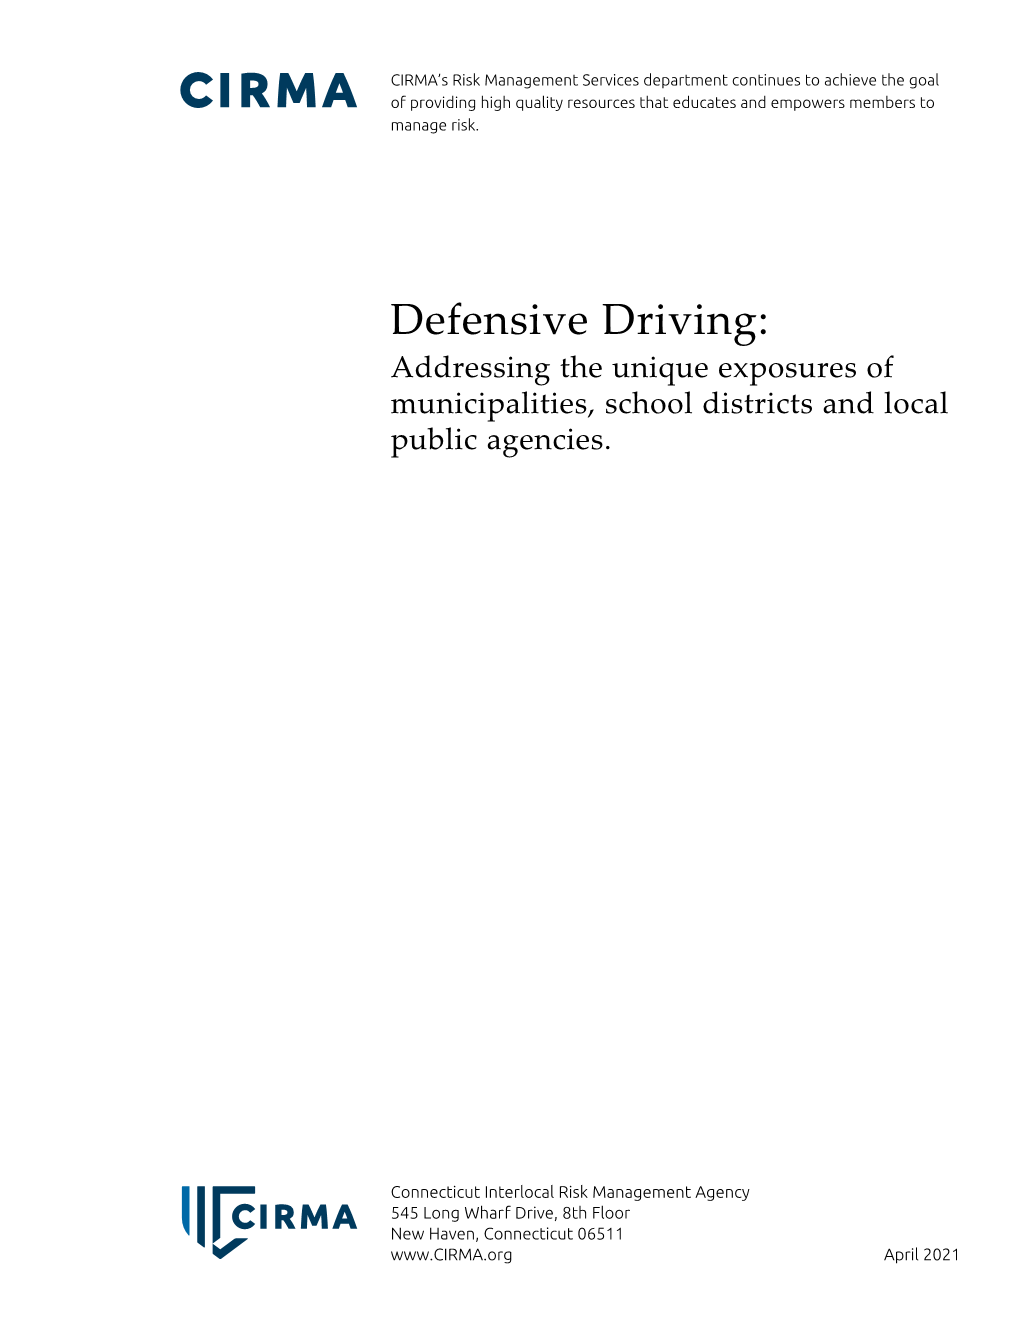 Defensive Driving: Addressing the Unique Exposures of Municipalities, School Districts and Local Public Agencies